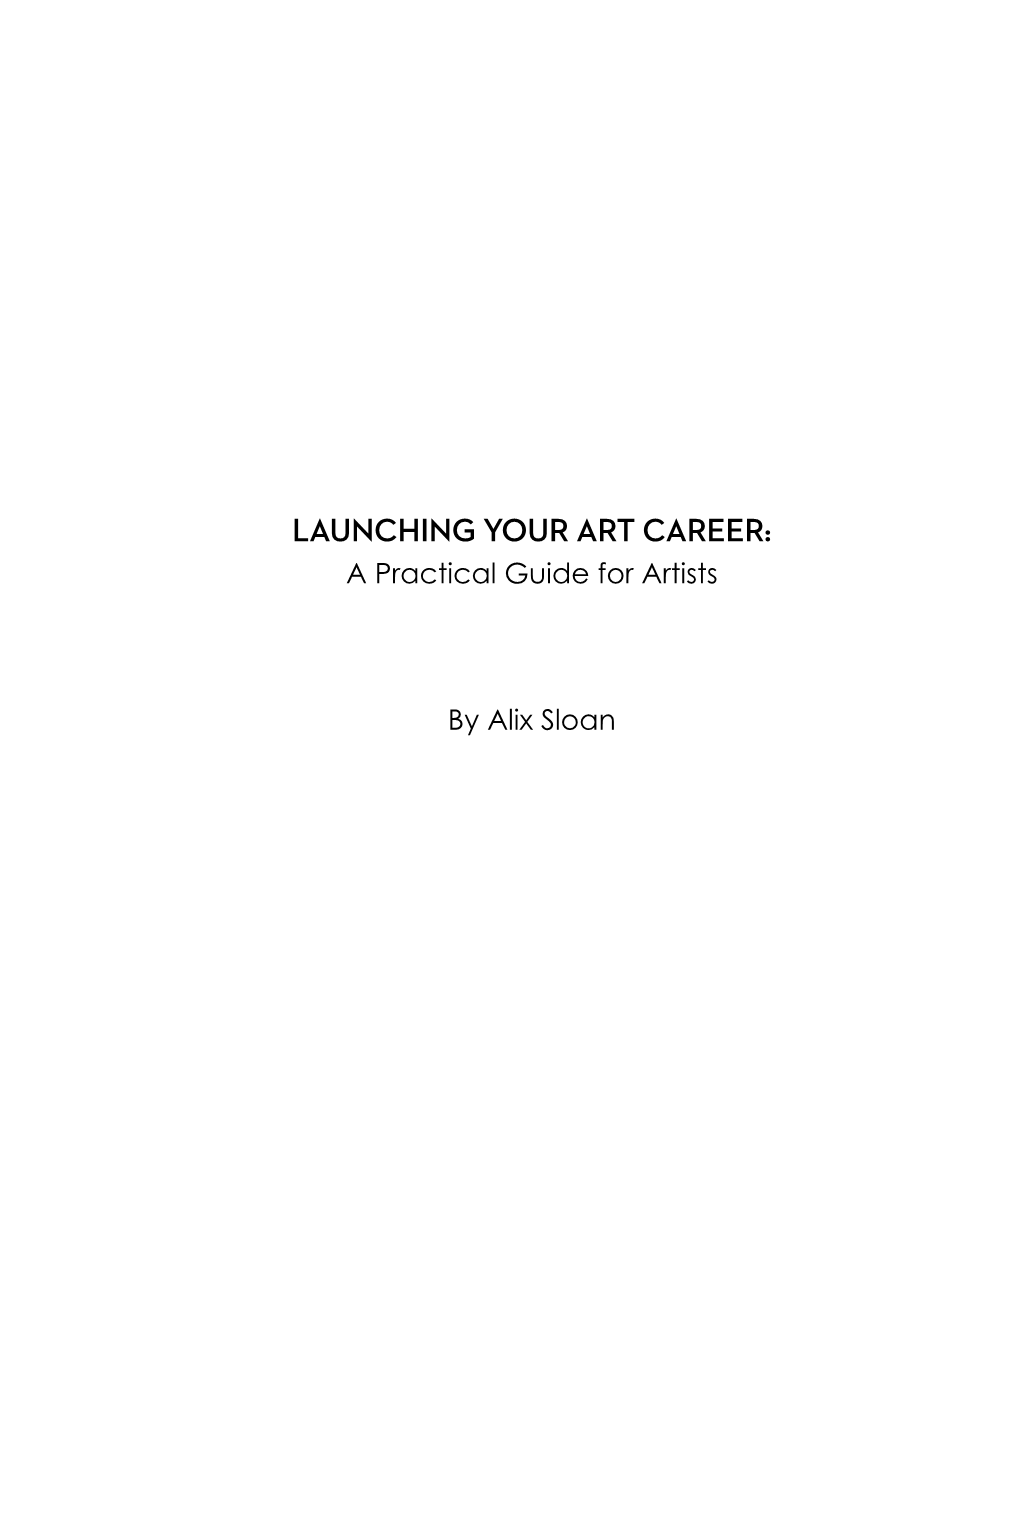 LAUNCHING YOUR ART CAREER: a Practical Guide for Artists